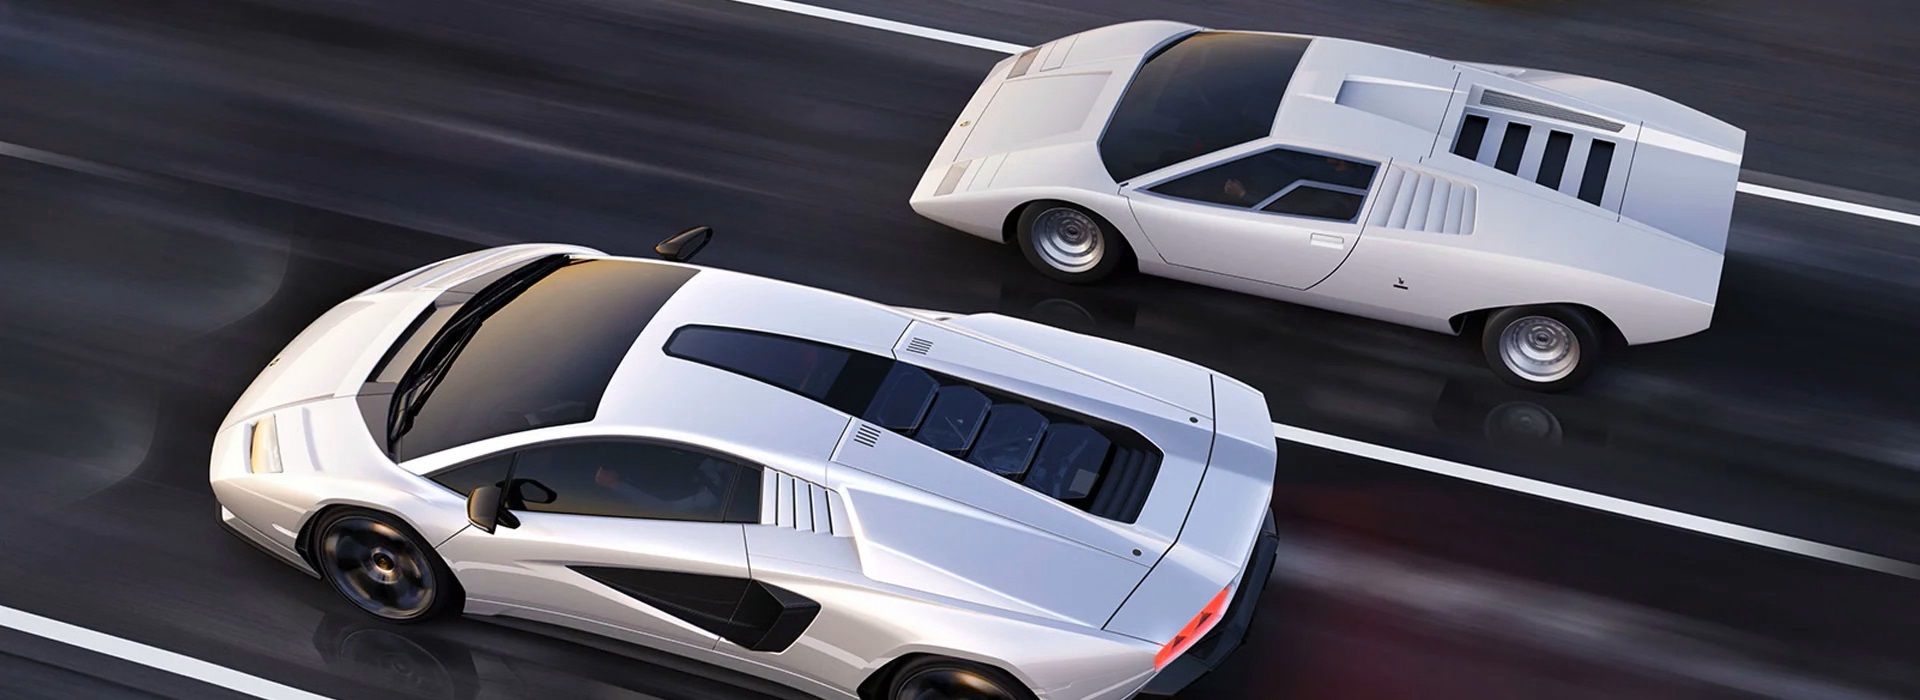 The first and the new Lamborghini Countach LPI 800-4 model race on the road. 